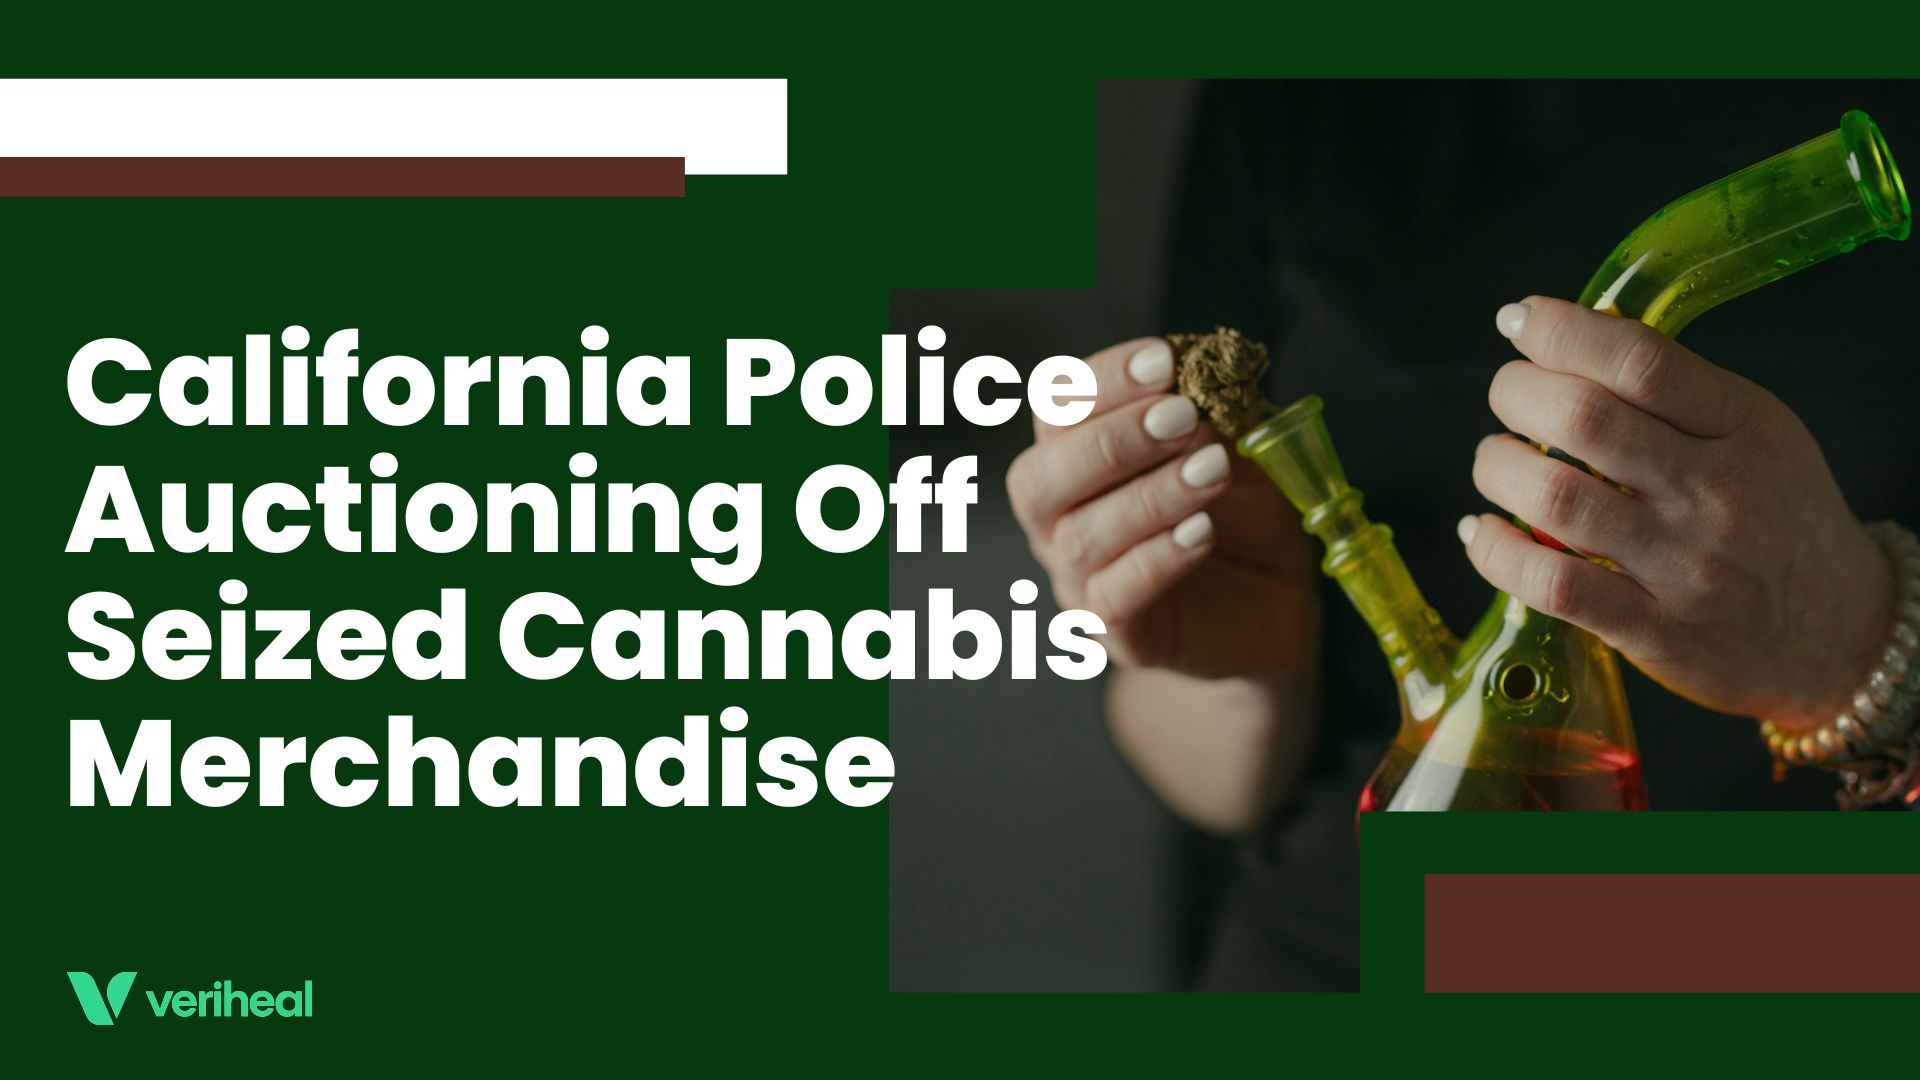 California Police Auctioning Off Seized Cannabis Merchandise